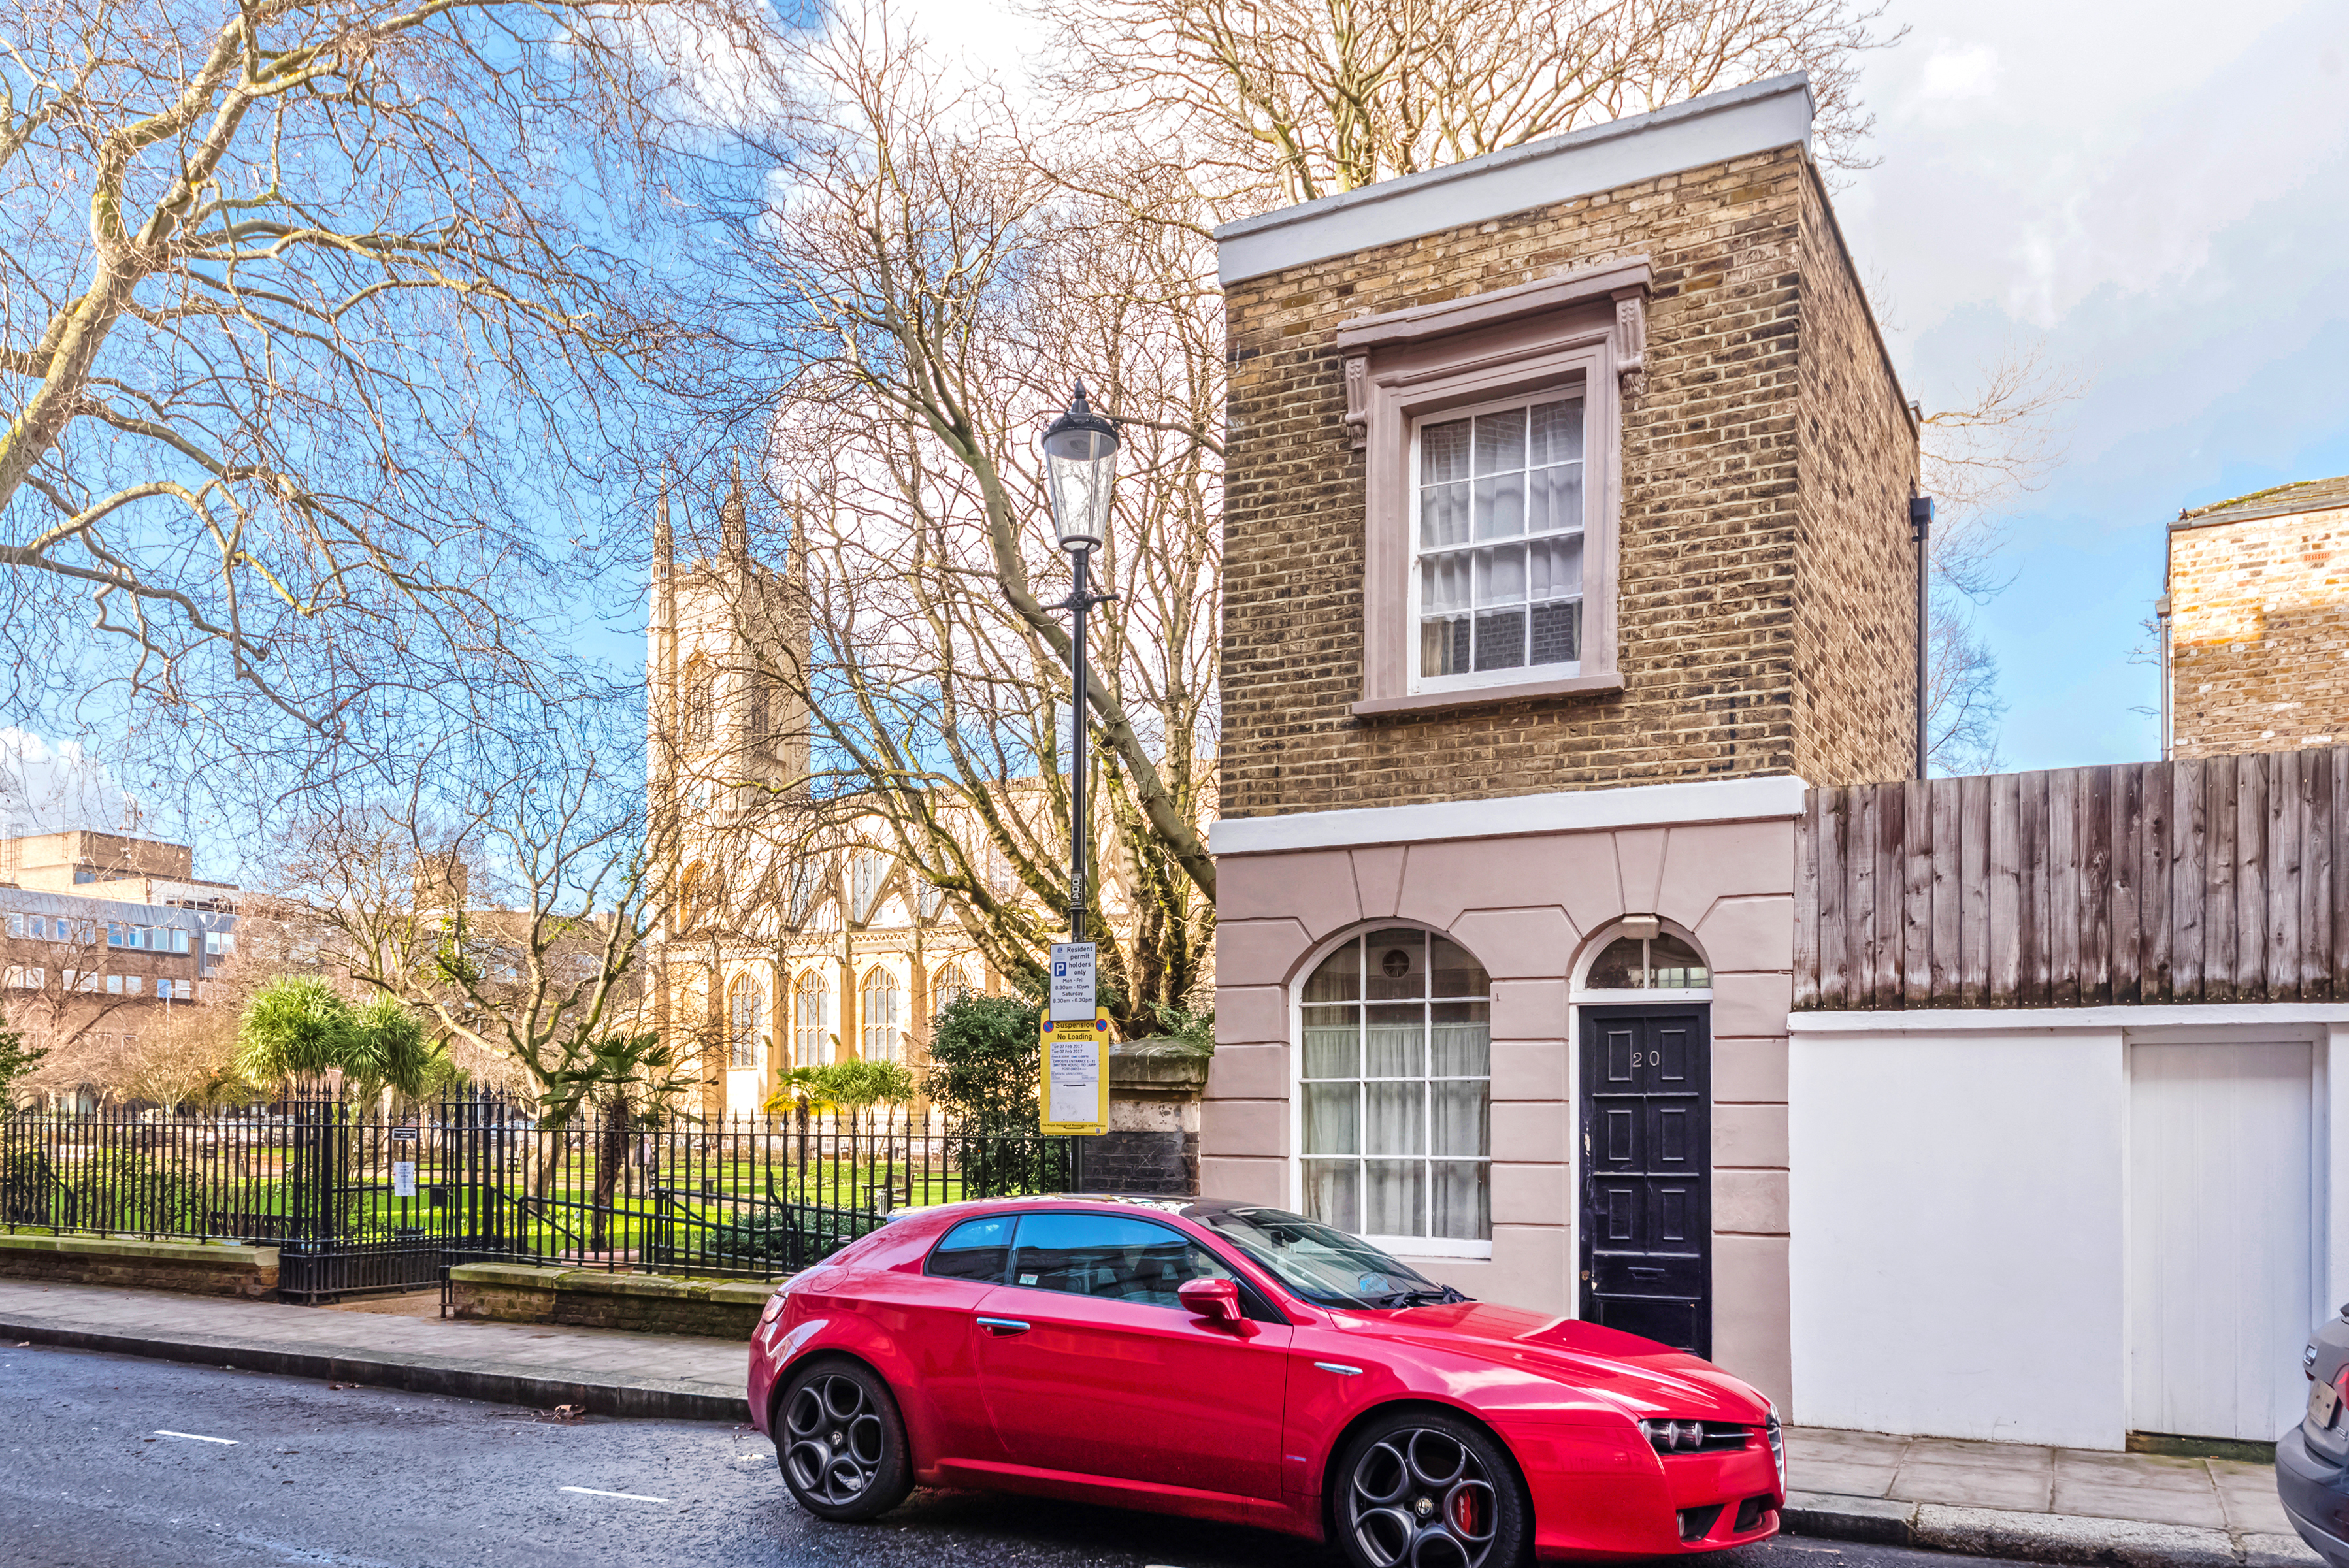 Even One of London’s Smallest Houses Still Costs $750,000